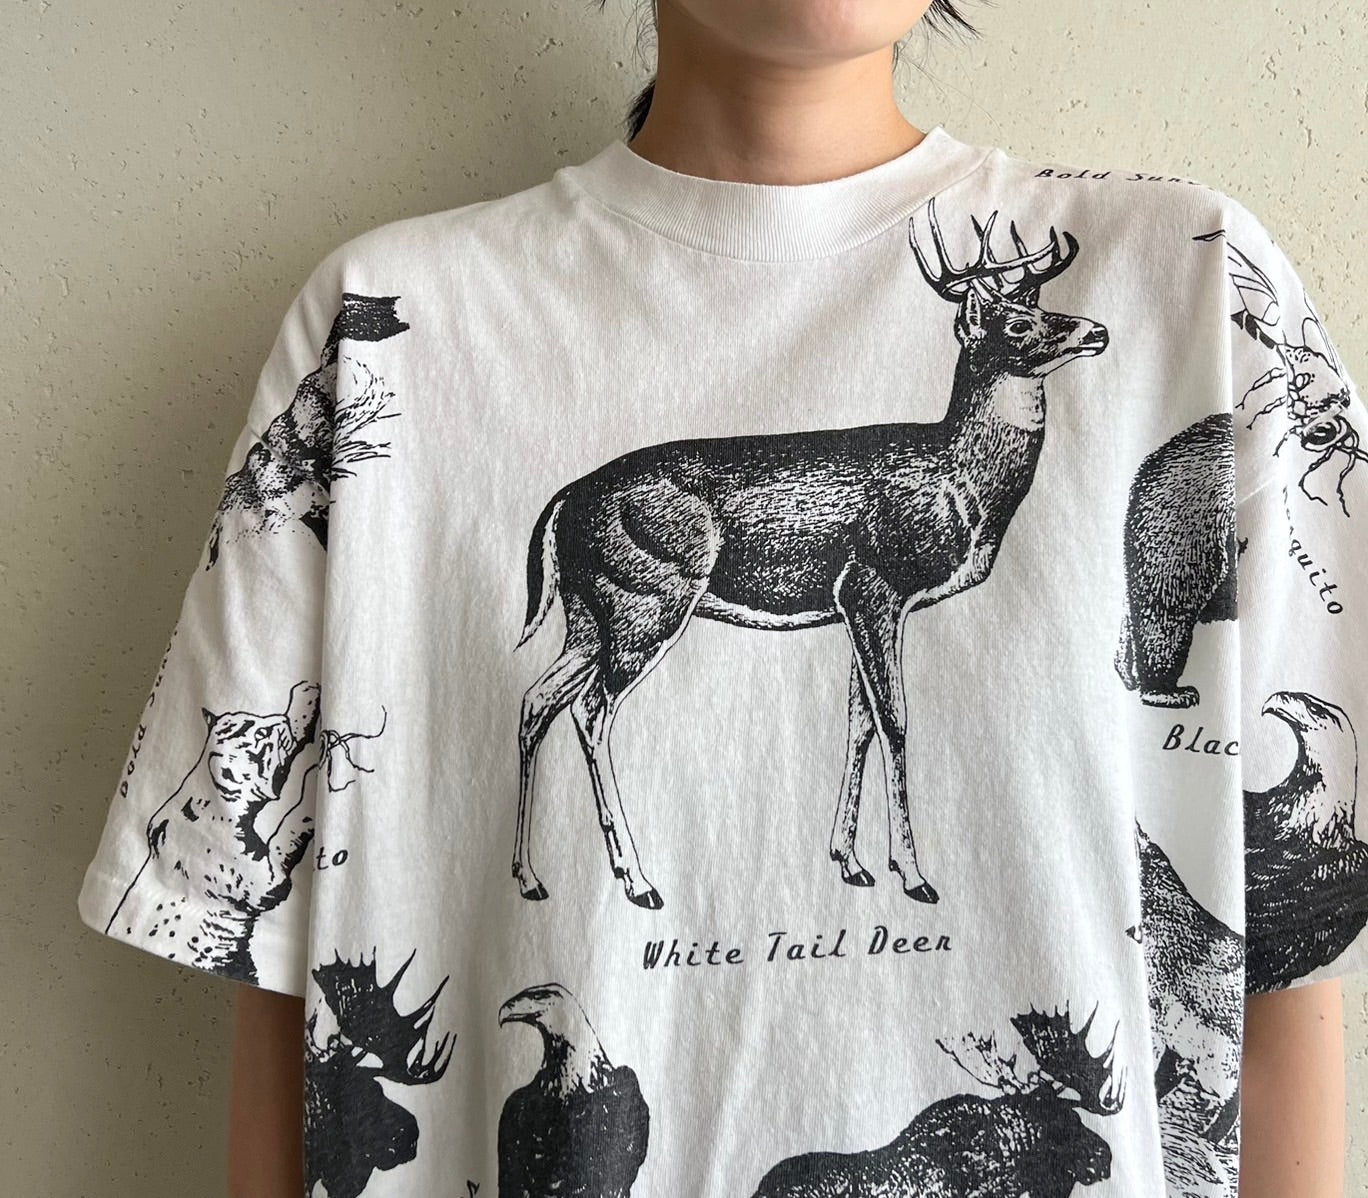 90s Animal Printed T-shirt Made in USA